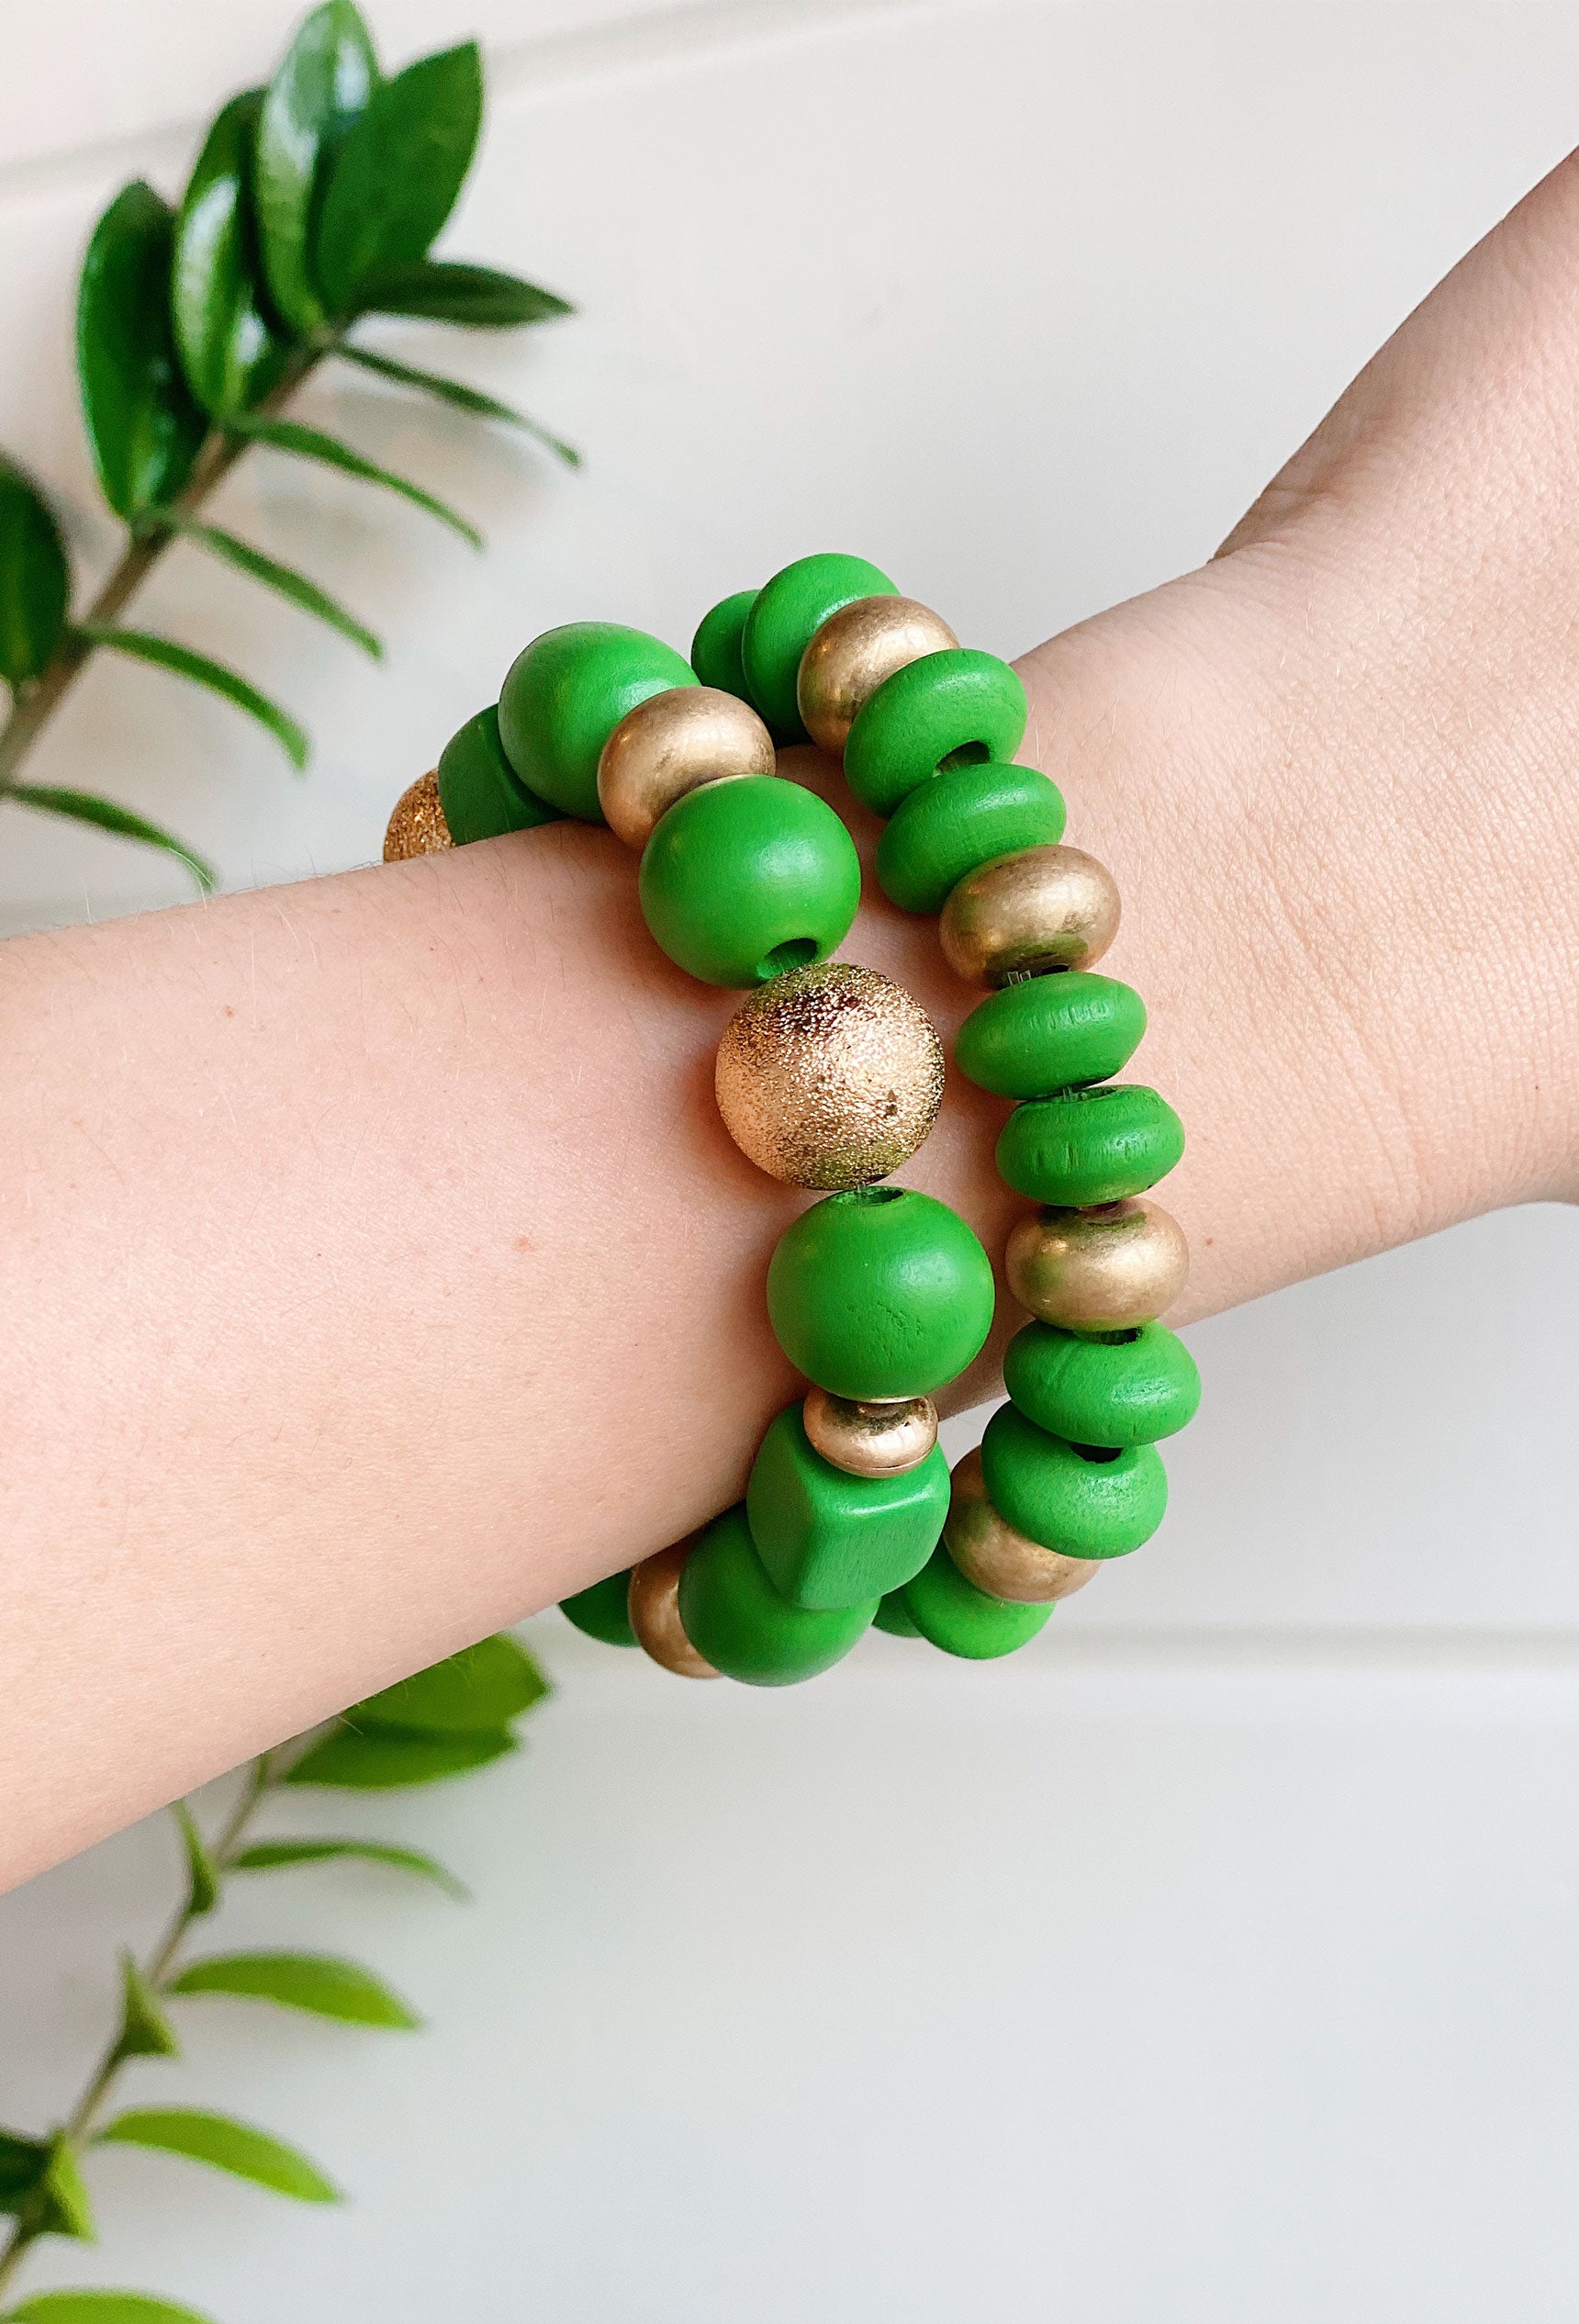 City Dreams Bracelet Set in Green, set of 2 bracelets, gold and green wooded beads 